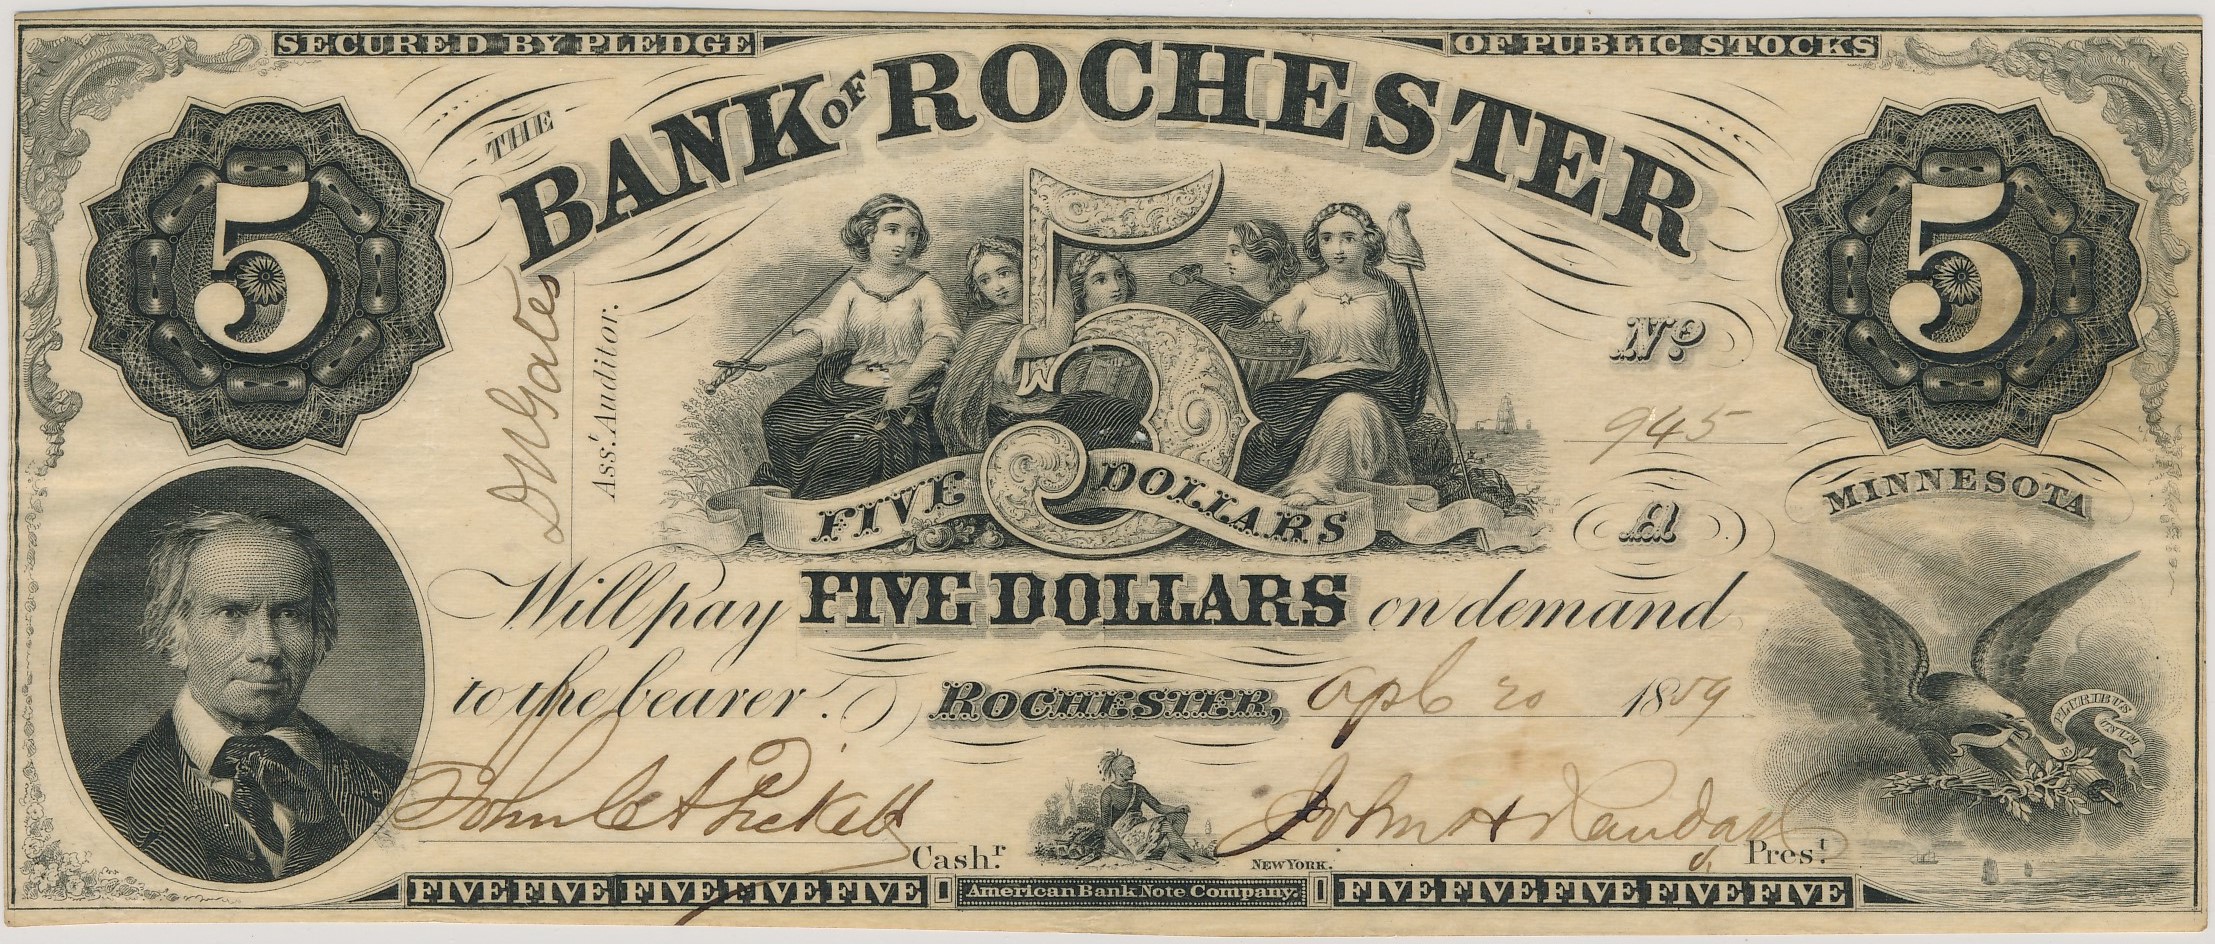 $5 Bank of Rochester